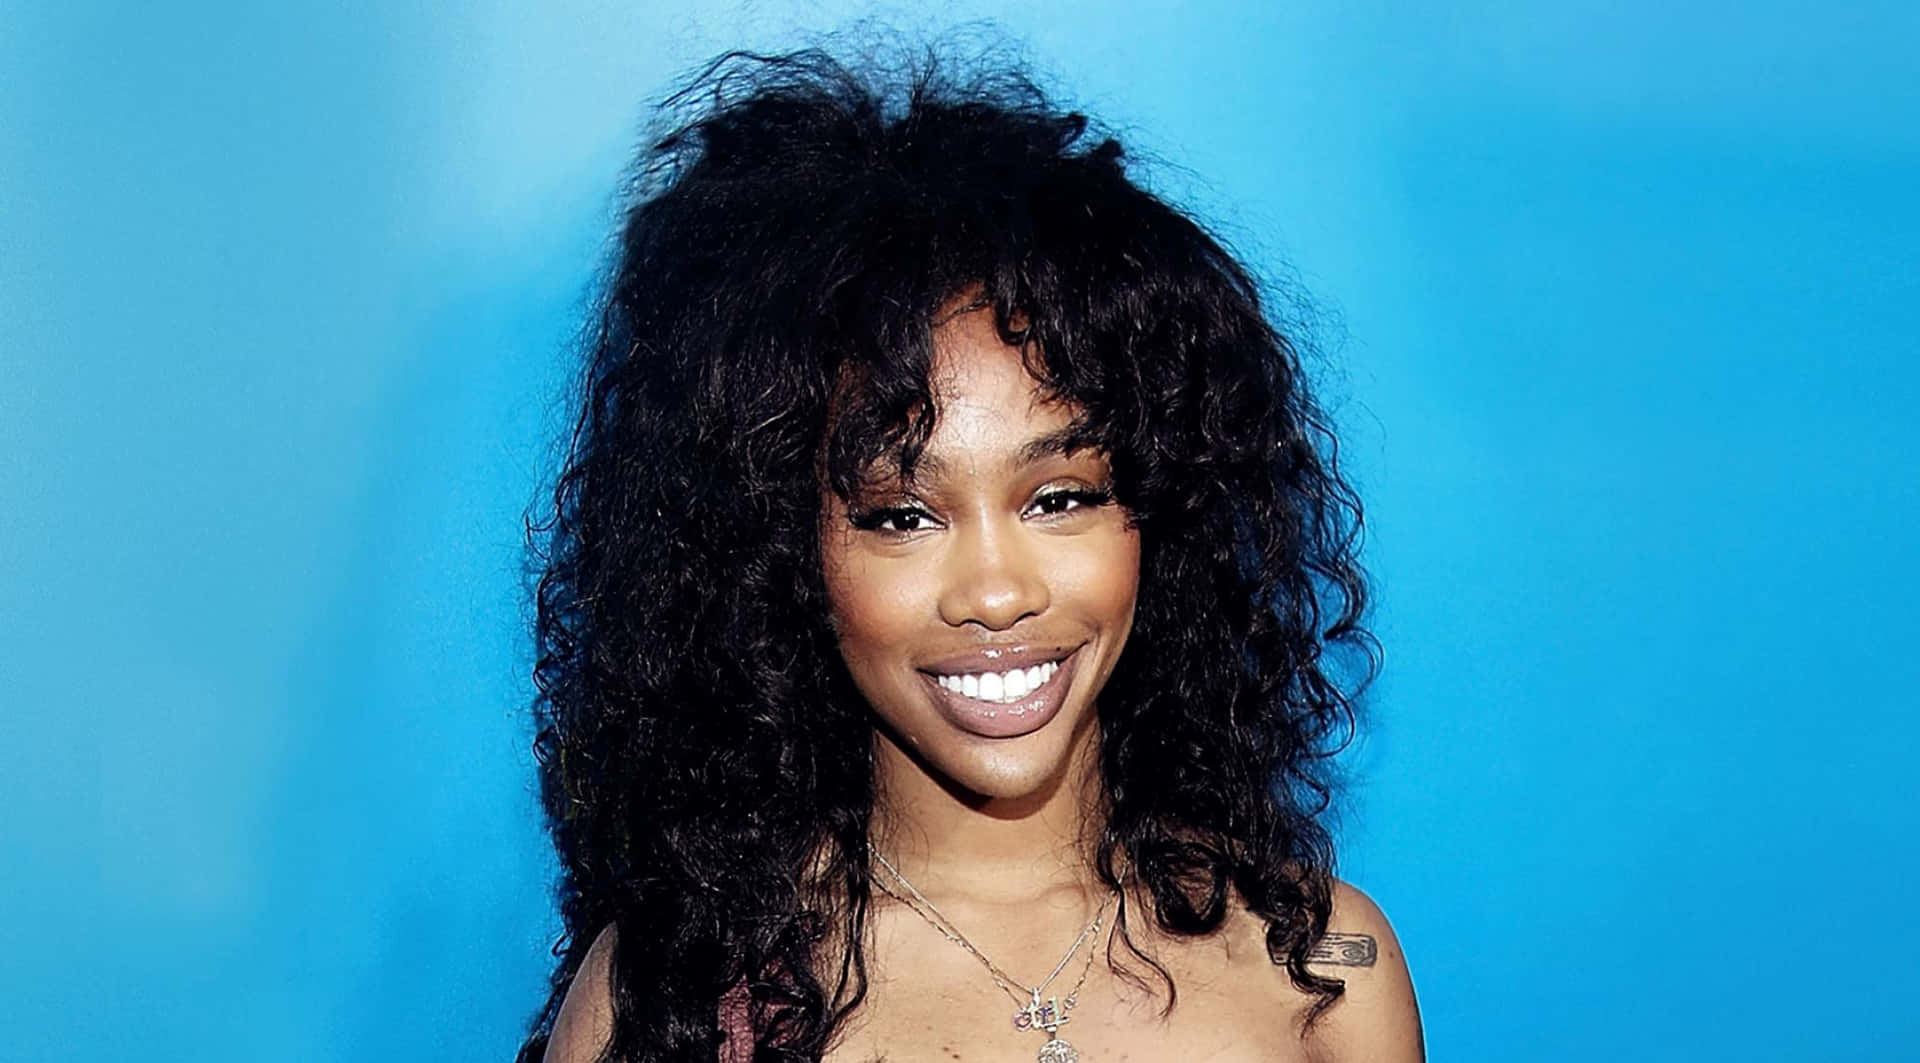 SZA poses in a black and white music video Wallpaper